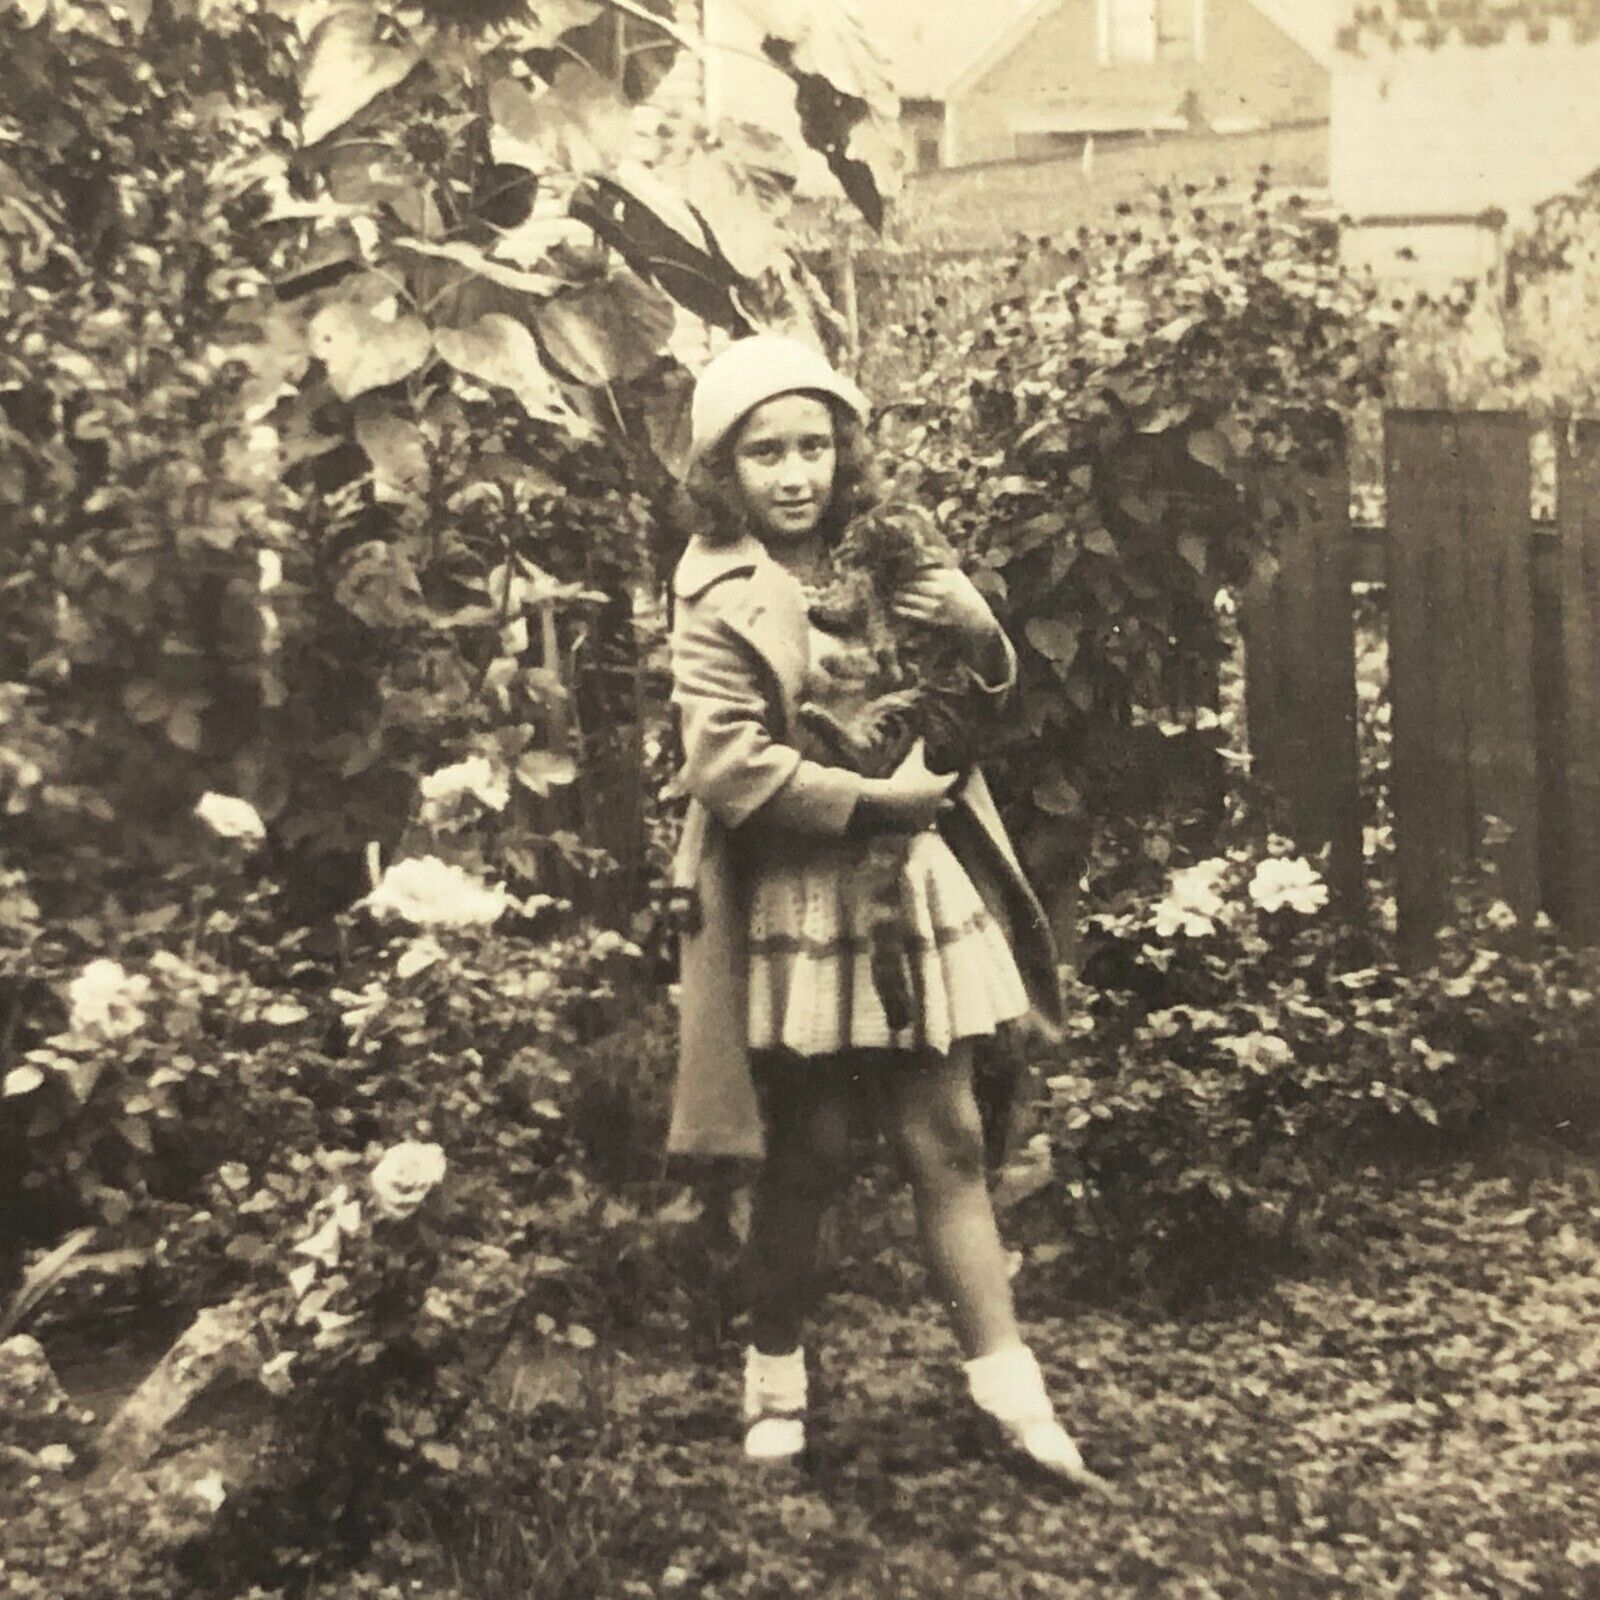 Vintage Pretty Girl with Kitty Cat Photo 30s 1940s Sunflowers Roses Garden Yard